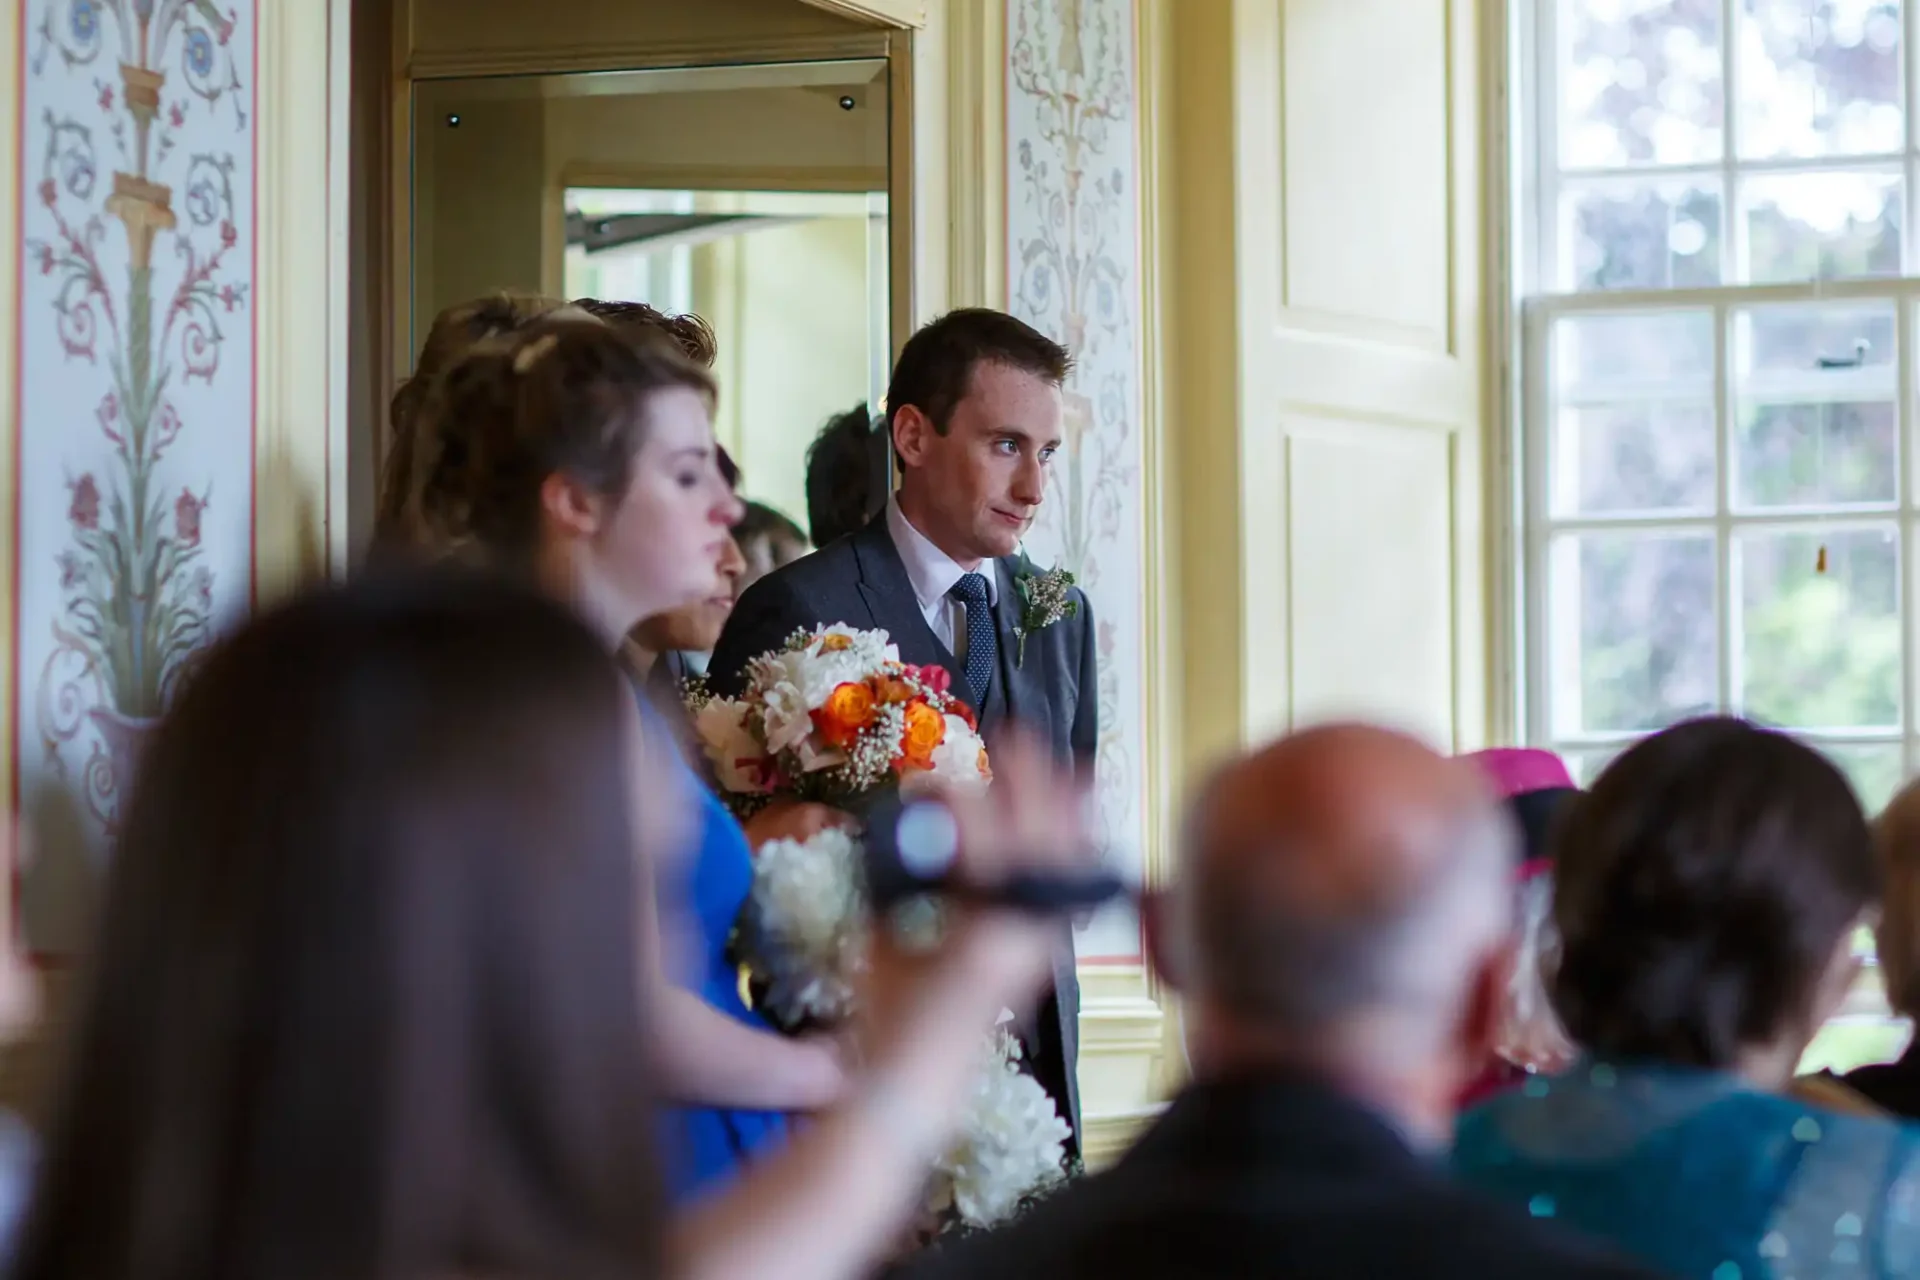 A groom seated beside a bridesmaid holding a bouquet, listening attentively during a wedding speech in a room with guests.